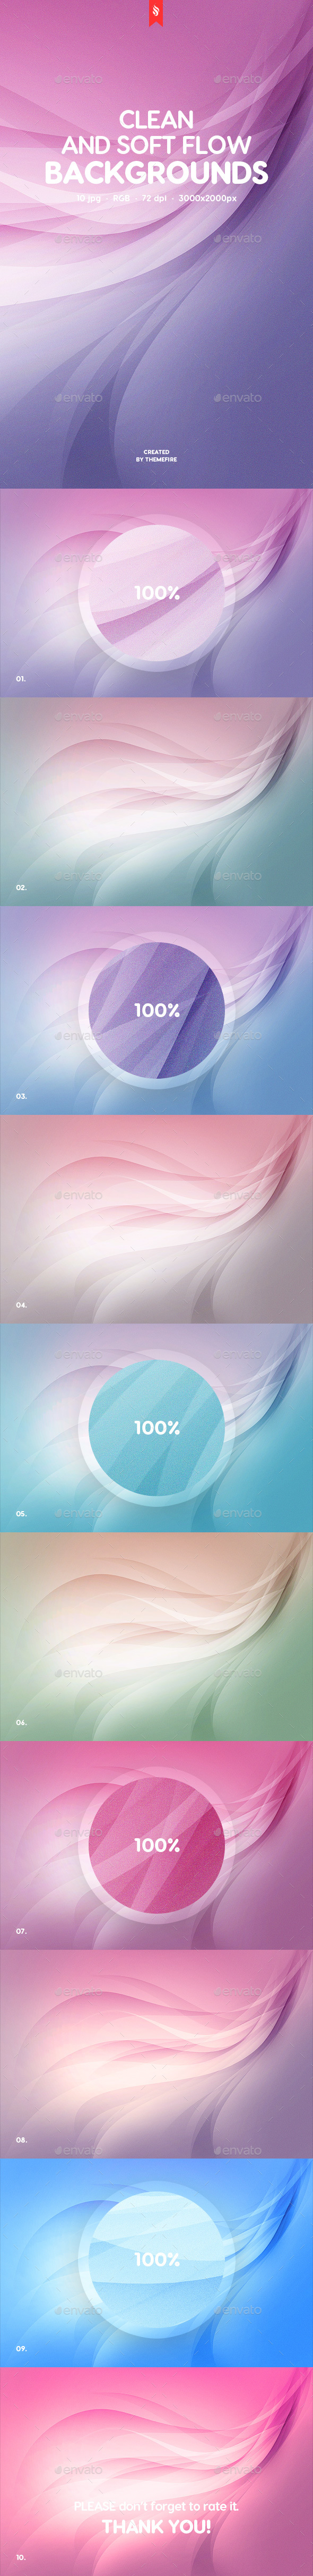 Clean and Soft Flow Background